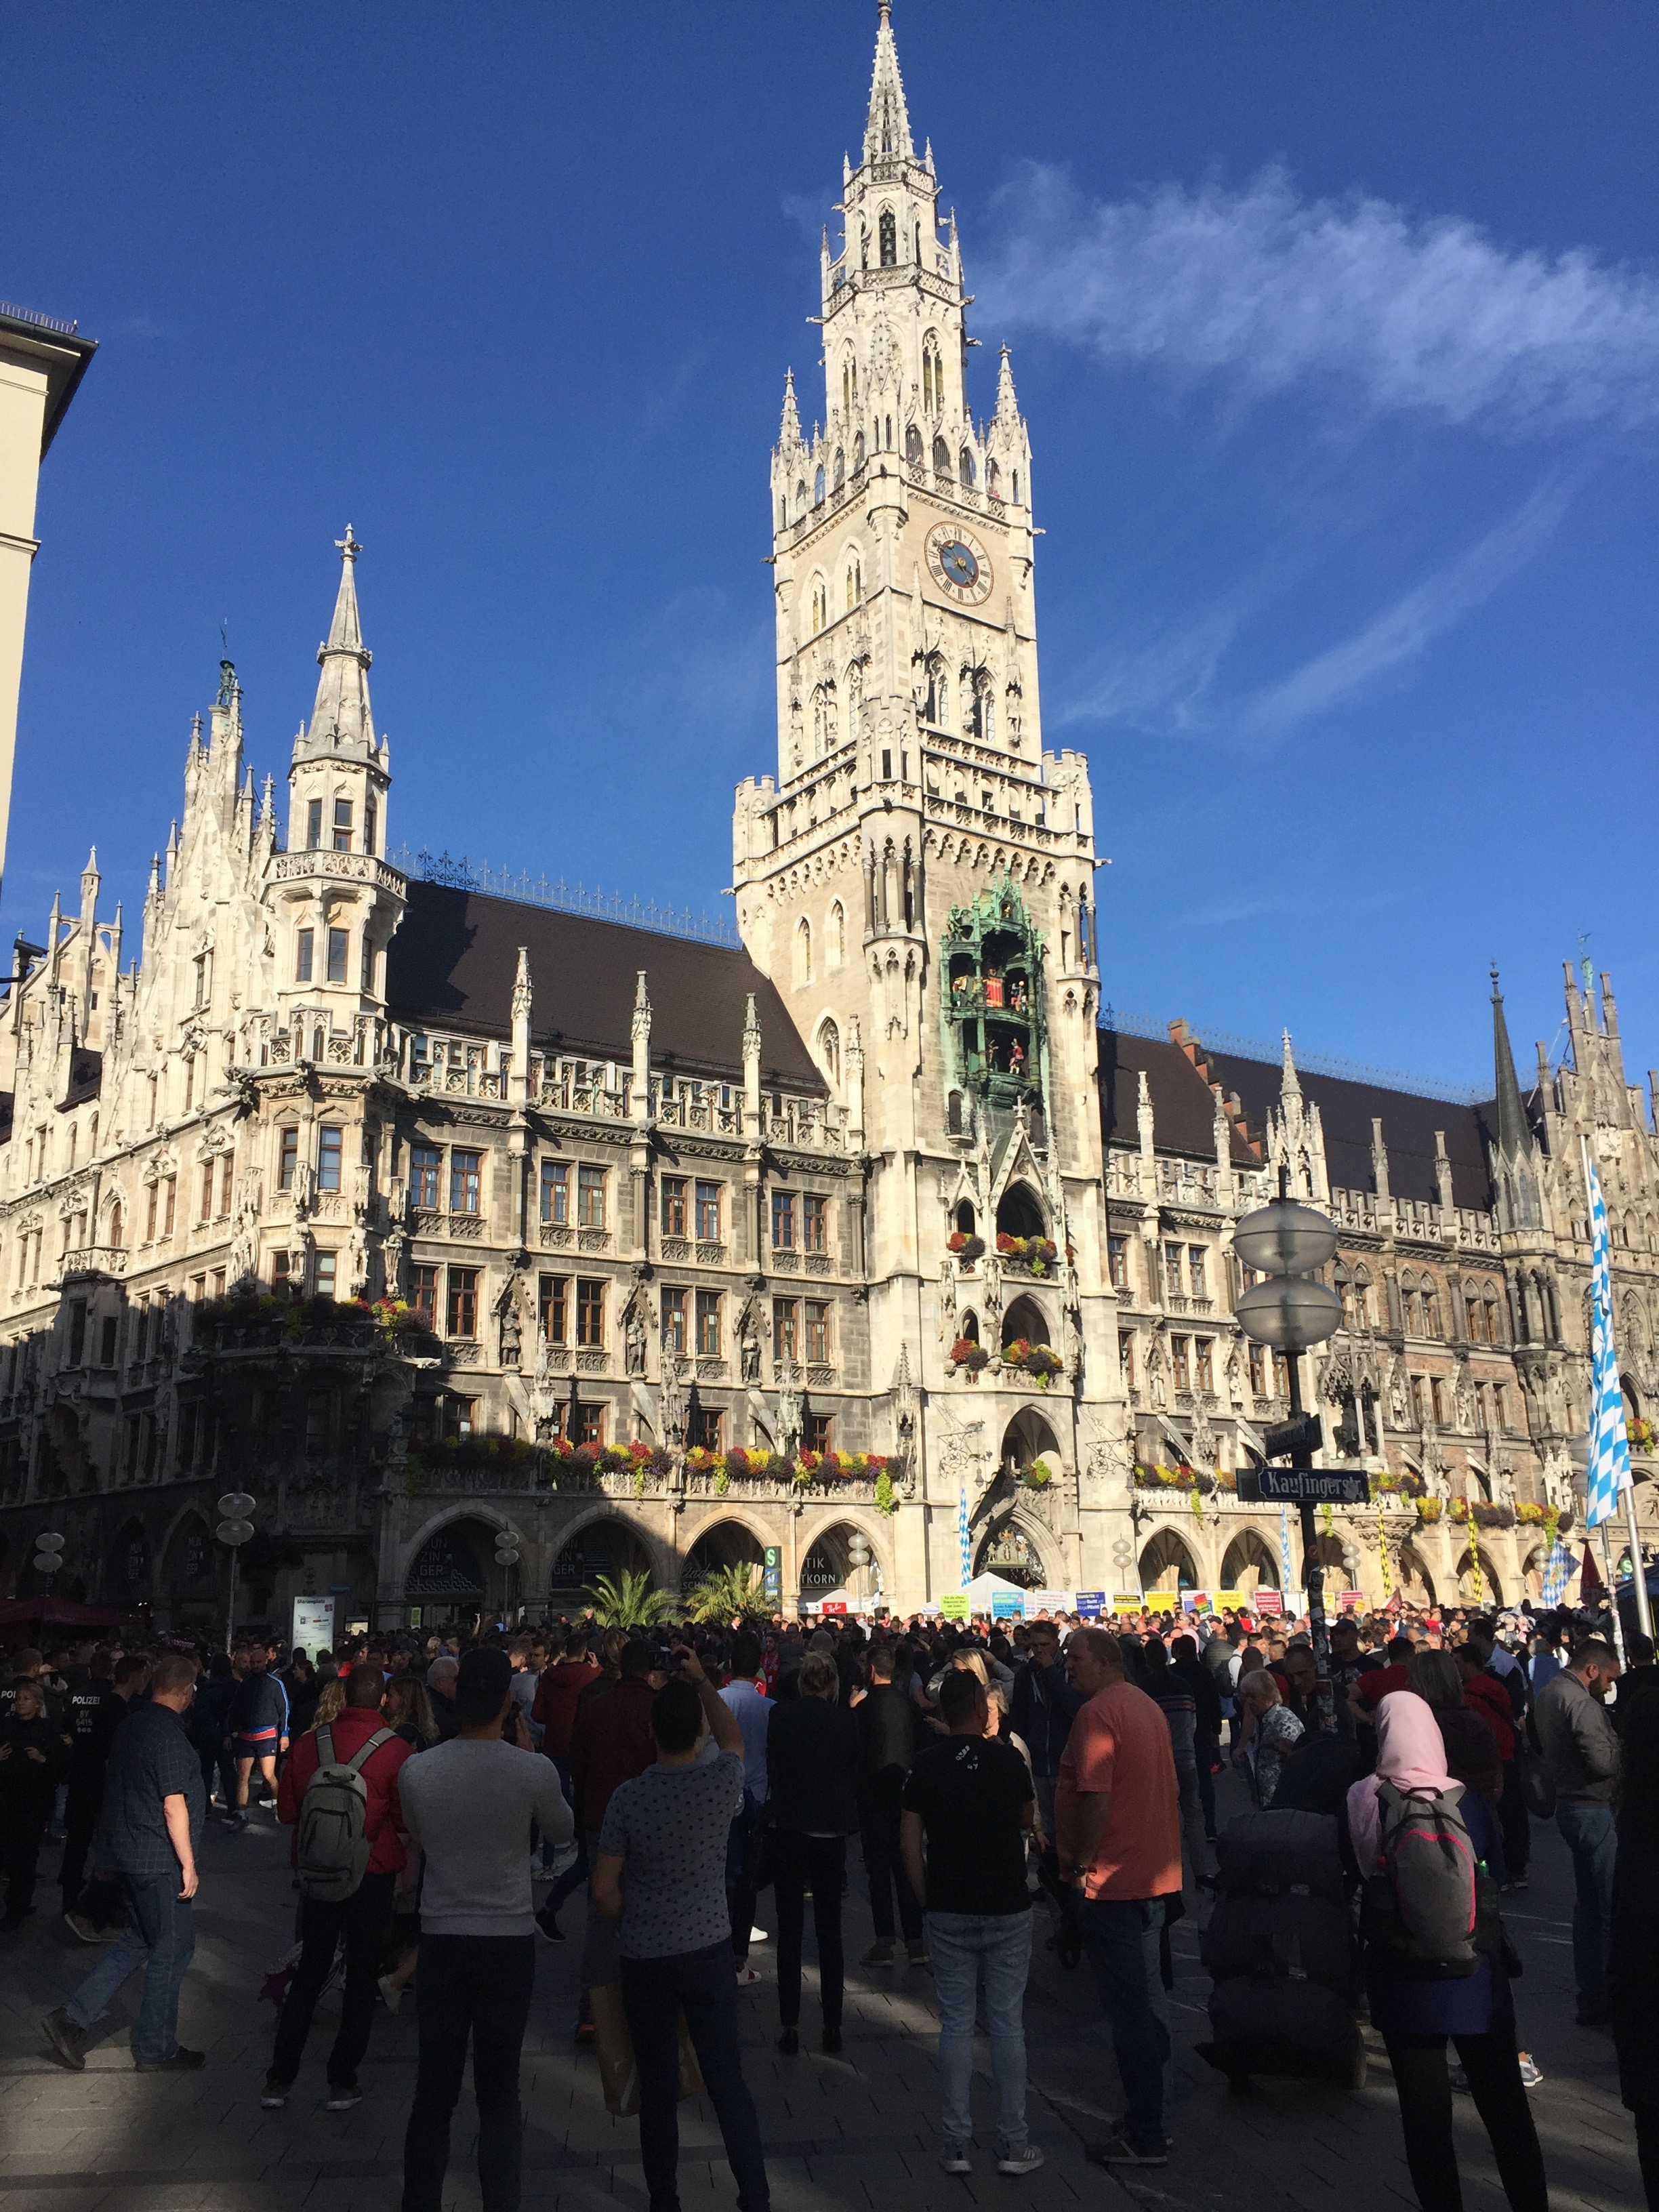 A large crowd assembled in front of the town hall at the Marienplatz